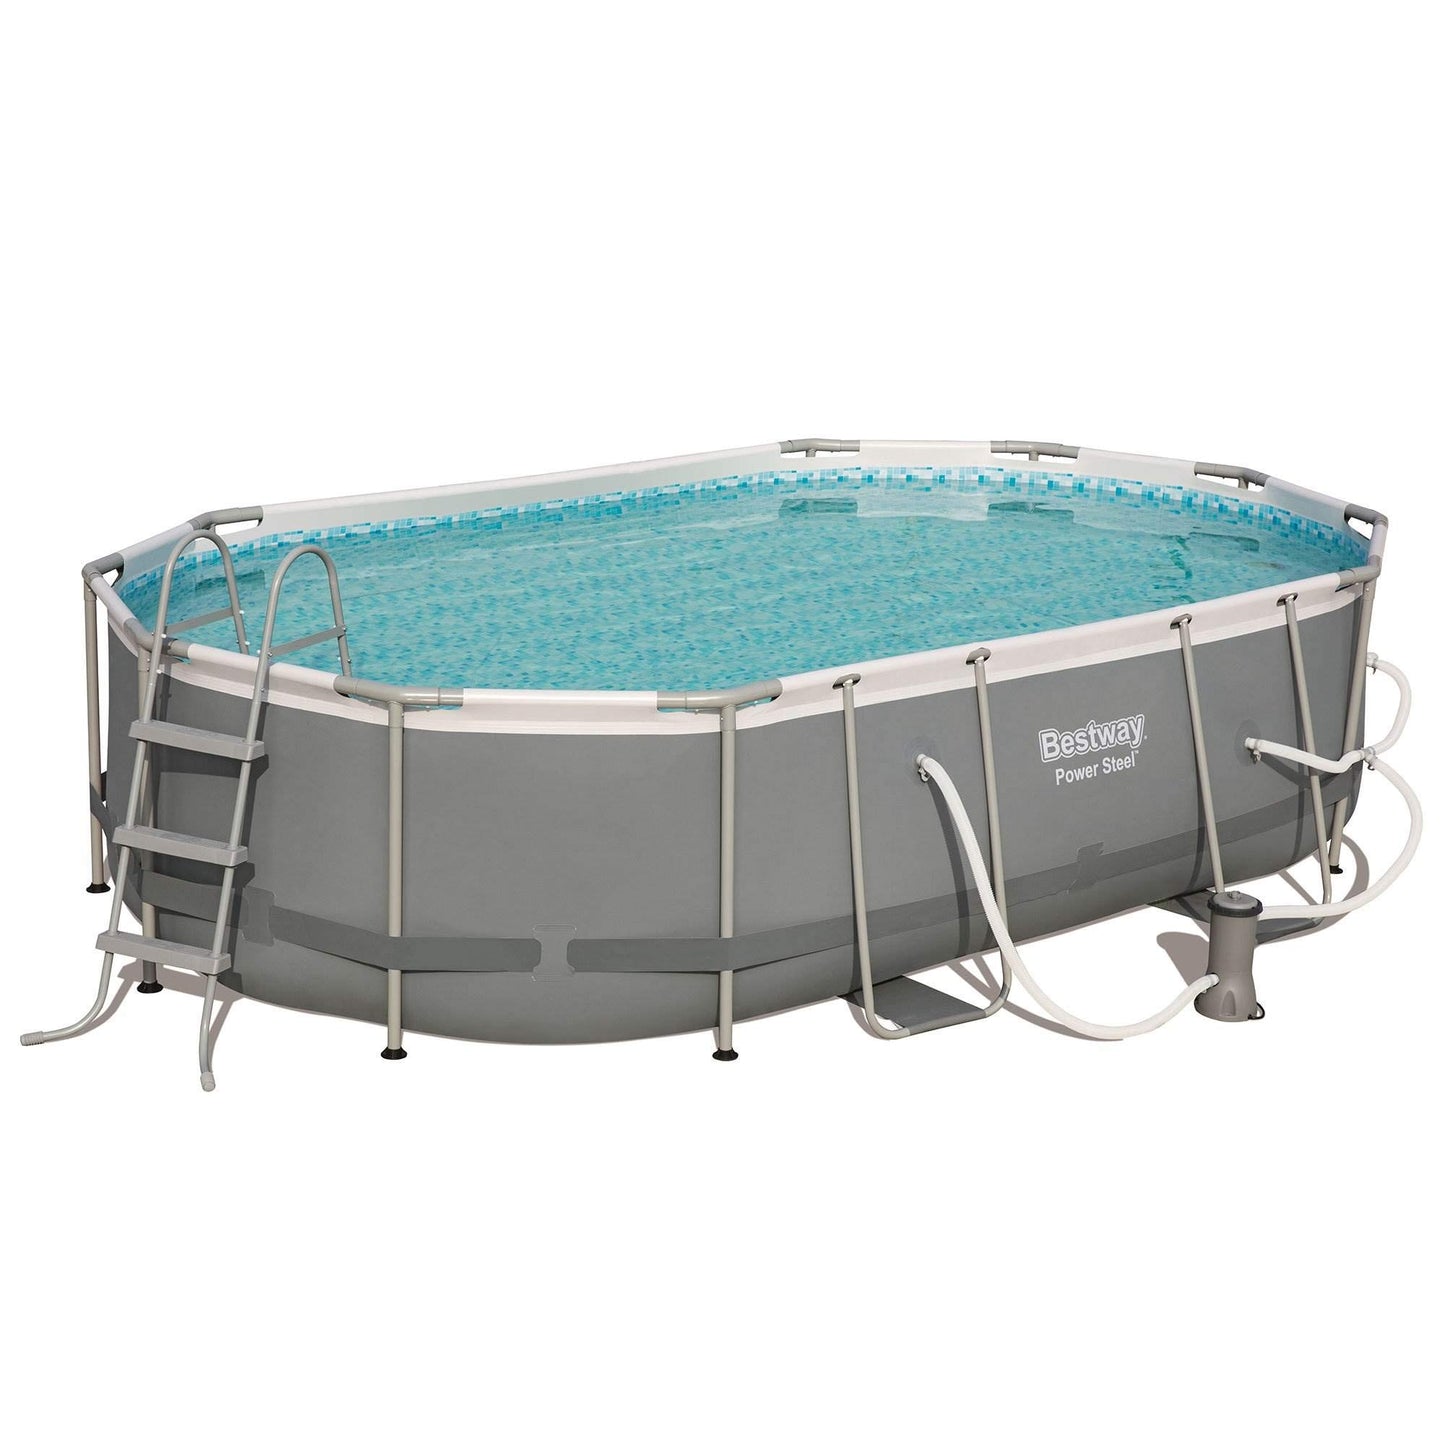 Bestway Power Steel 16' x 10' x 42" Rectangular Metal Frame Above Ground Swimming Pool Set with 1000 GPH Filter Pump, Ladder, and Pool Cover 16' x 10' x 42"